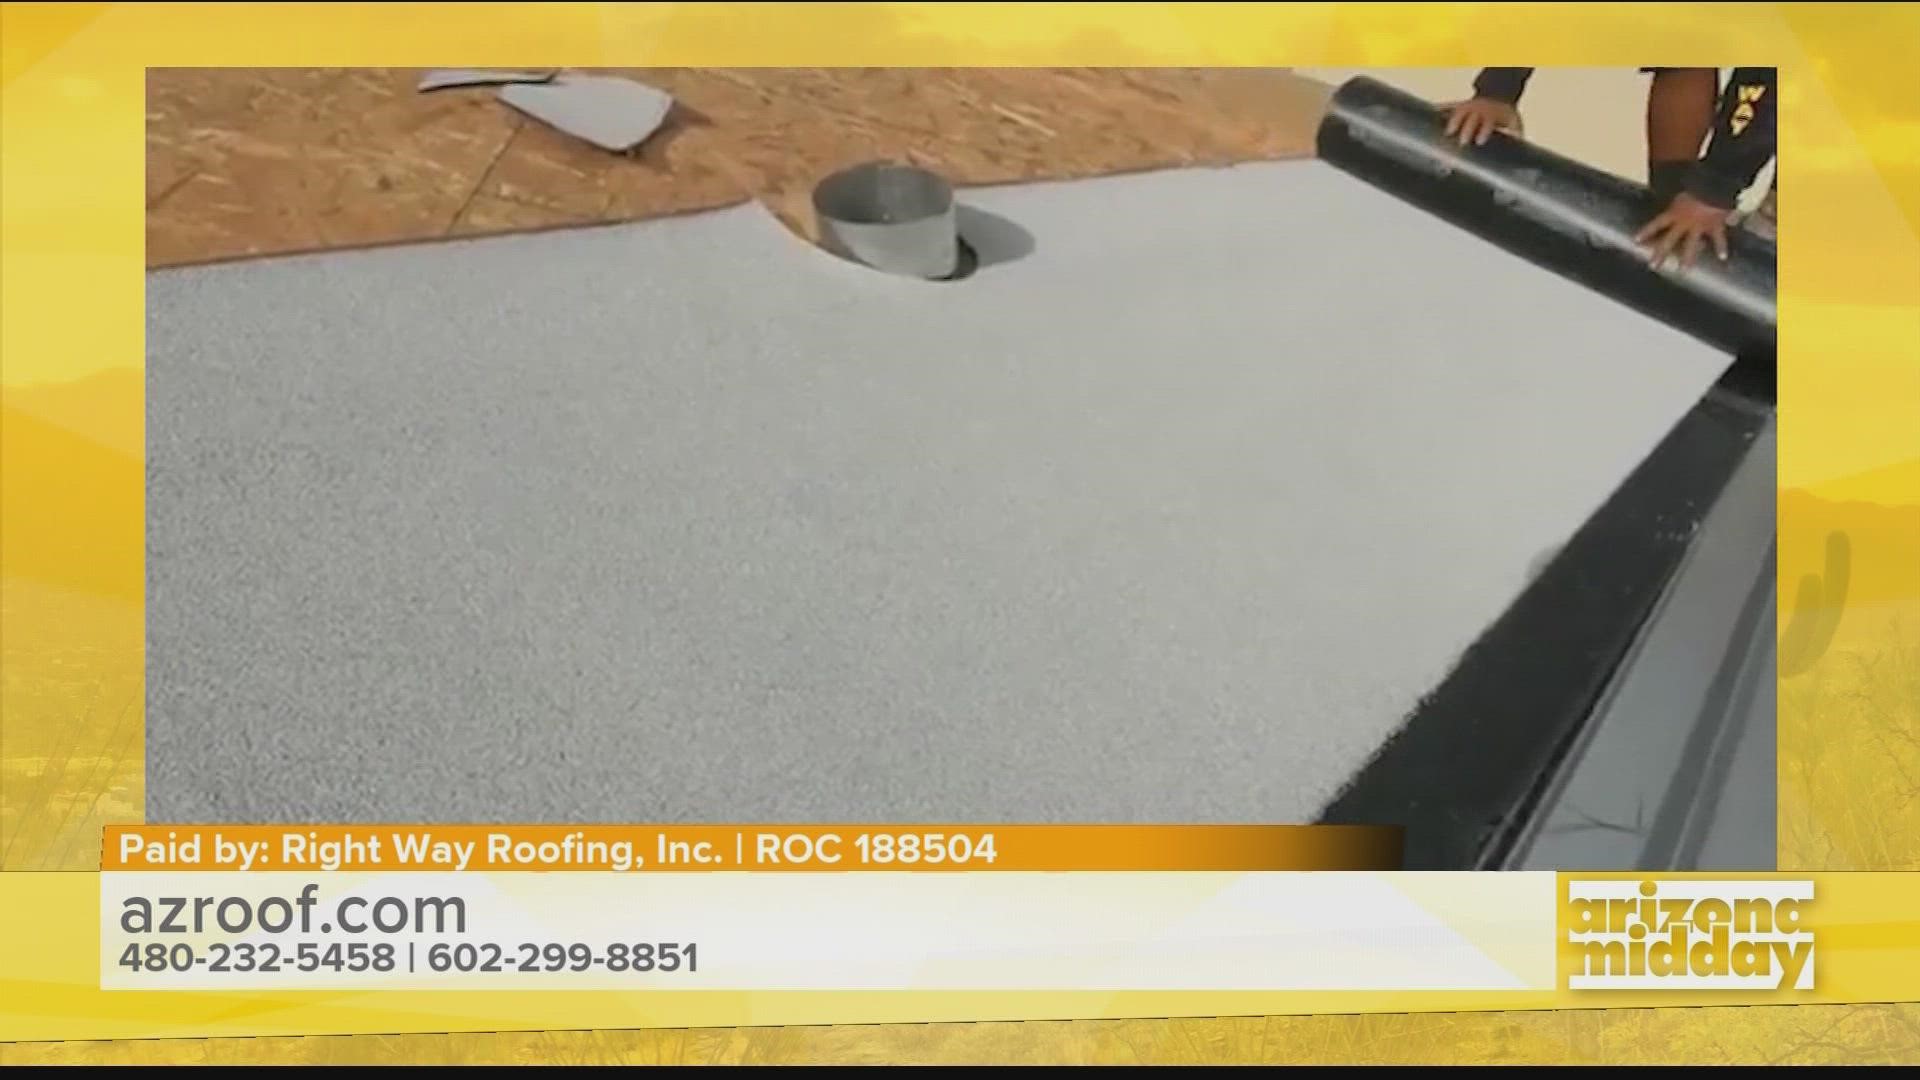 Lori Clark, Owner of Right Way Roofing, shares the different times of underlayment & which one is best with desert roofs plus how Right Way Roofing can help!